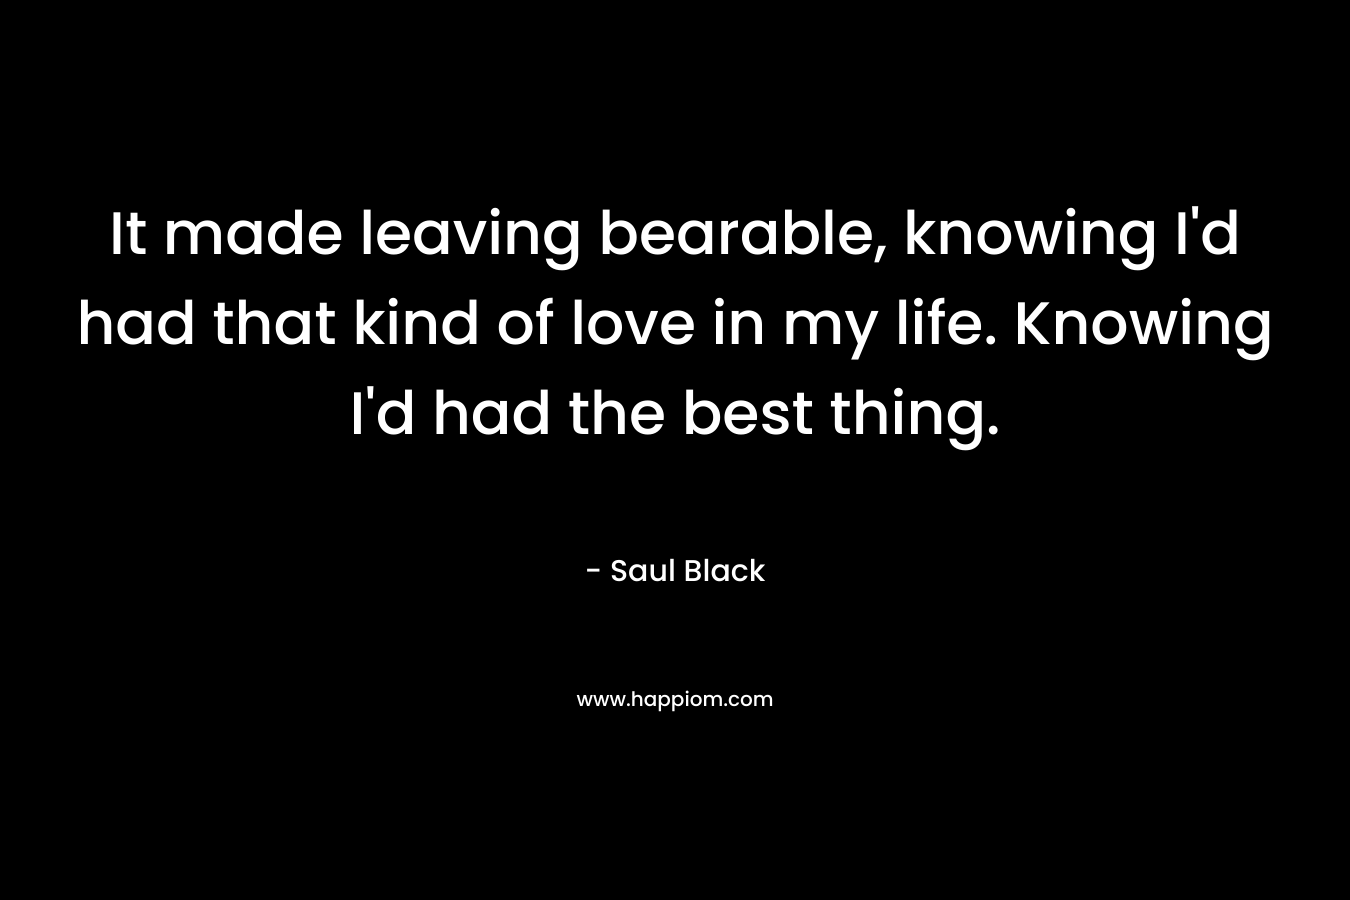 It made leaving bearable, knowing I’d had that kind of love in my life. Knowing I’d had the best thing. – Saul Black